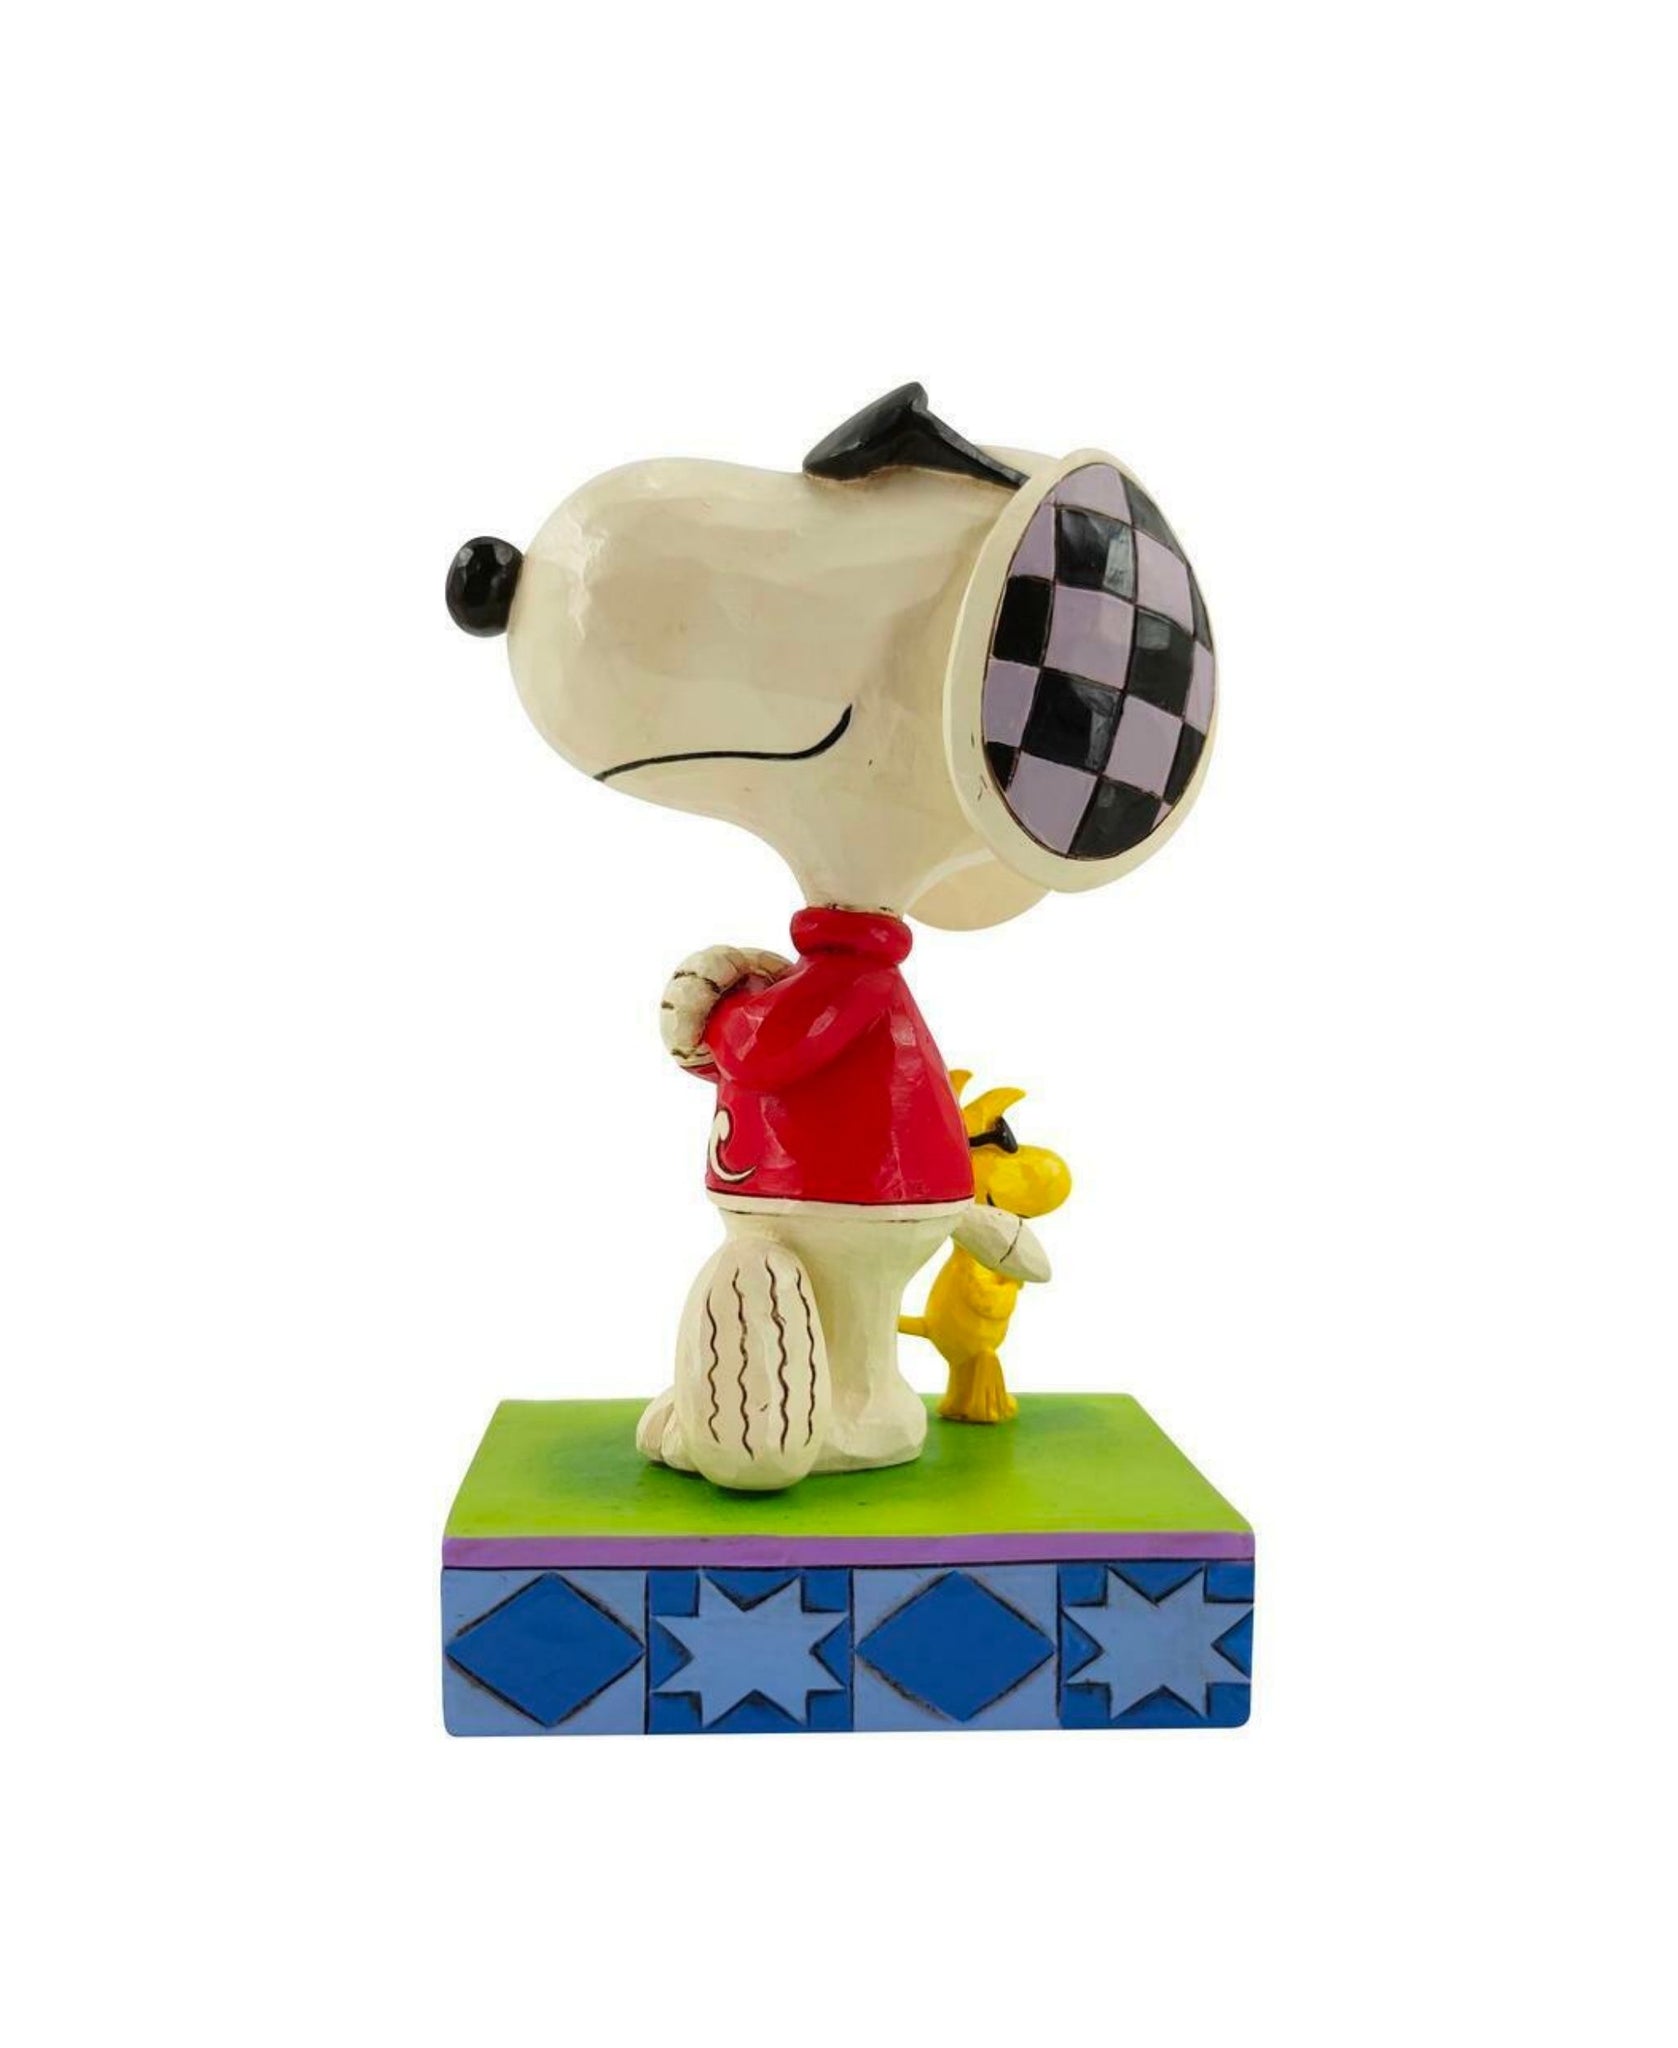 Jim Shore Peanuts 'Cool Pals' Snoopy and Woodstock